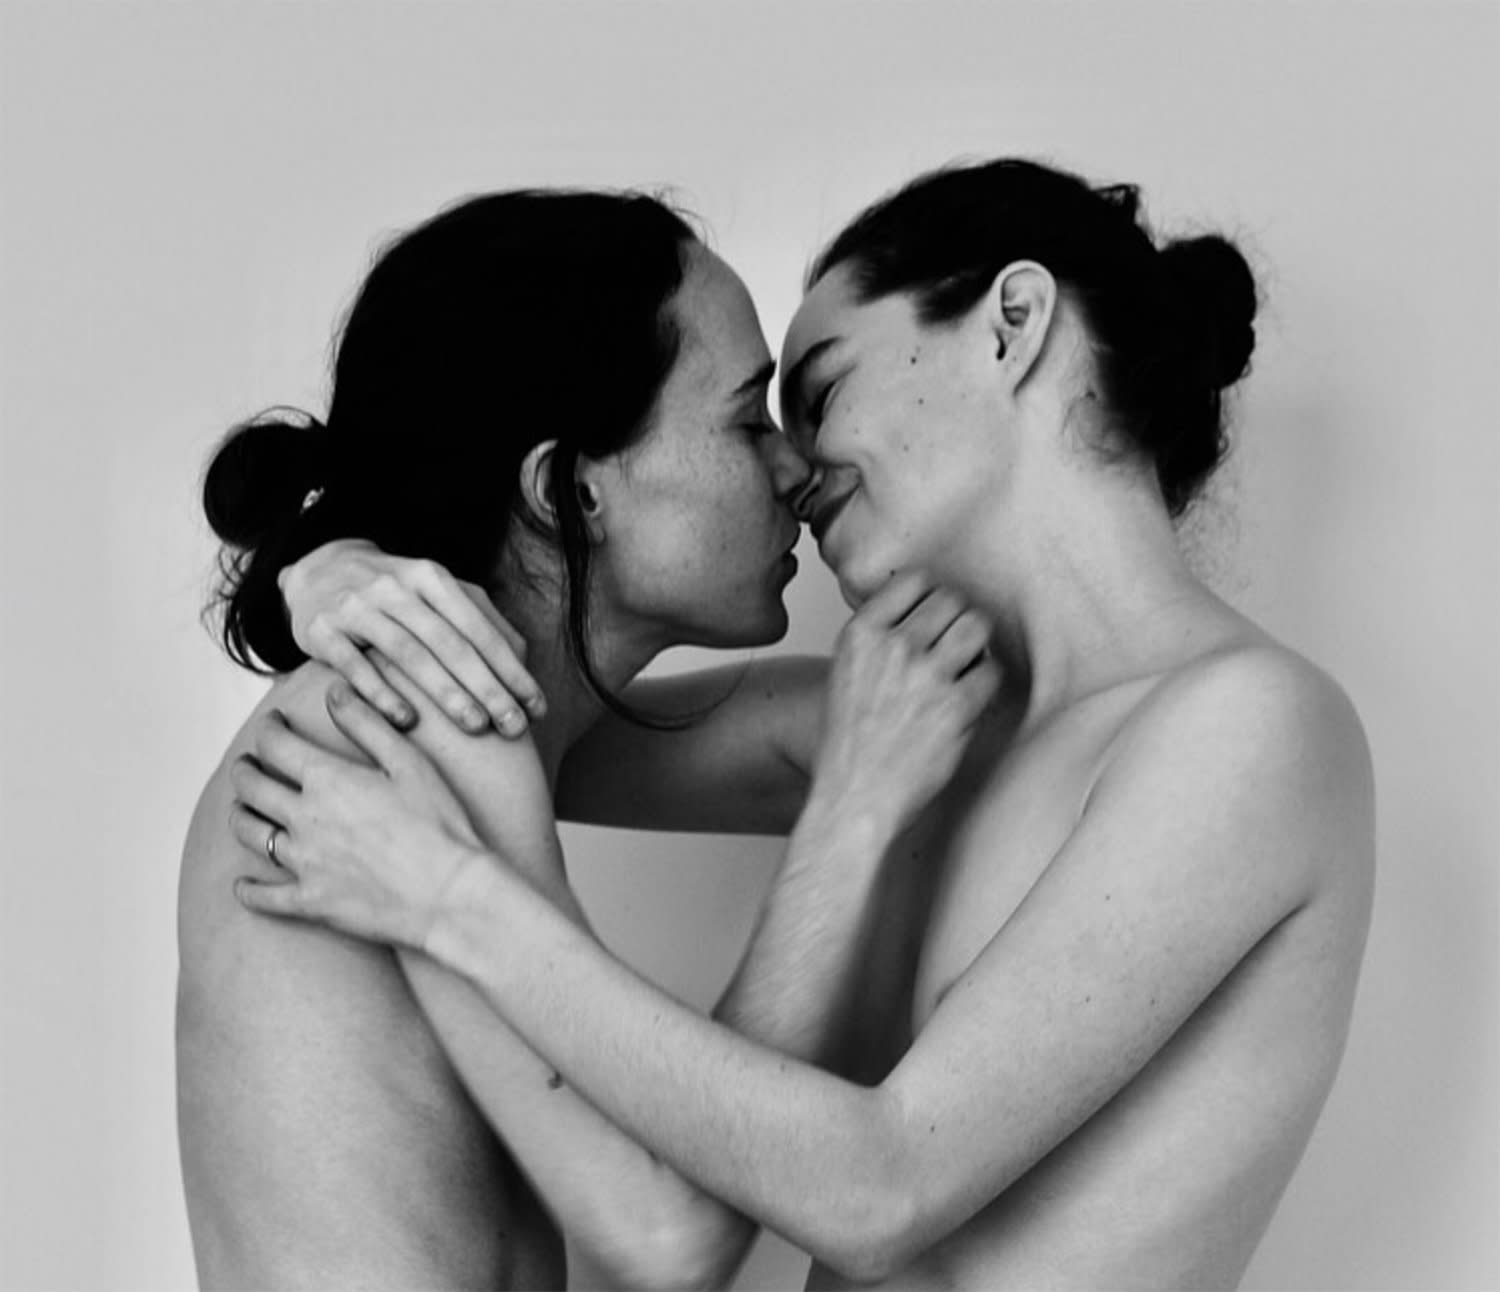 Ellen Page Celebrates Pride Month with Wife Emma Portner in Topless Kissing Photo.